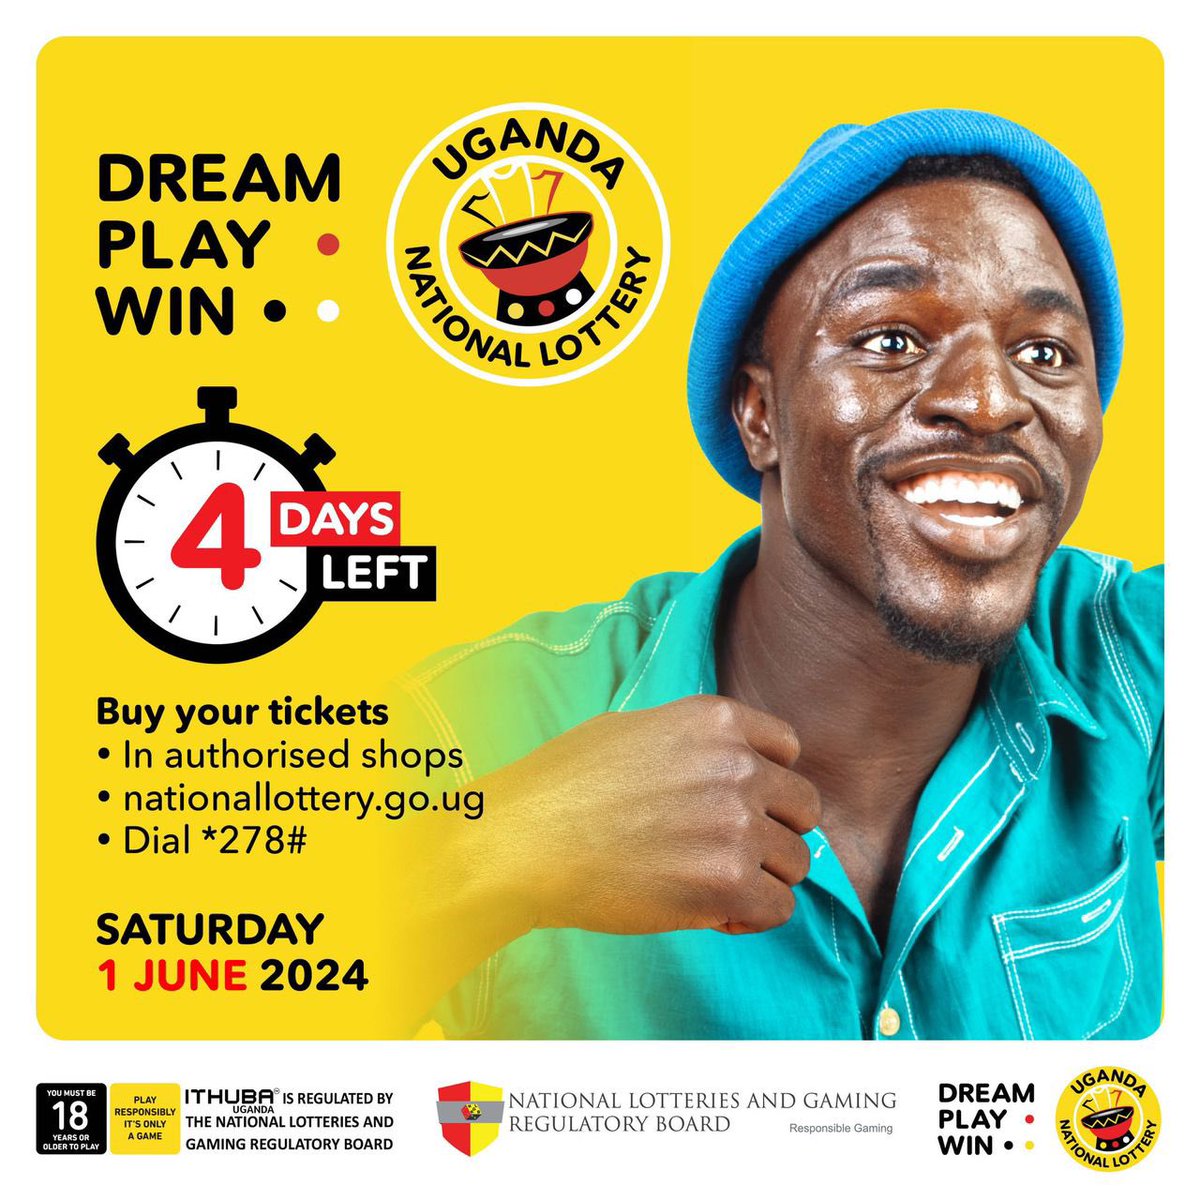 It’s now 4 Days left to the Uganda National Lottery day.👏👏 Simply buy your ticket via nationallottery.go.ug or Dial *278# to secure yourself one. Remember, Dream, Play and Win!!! #UgandaNationalLottery